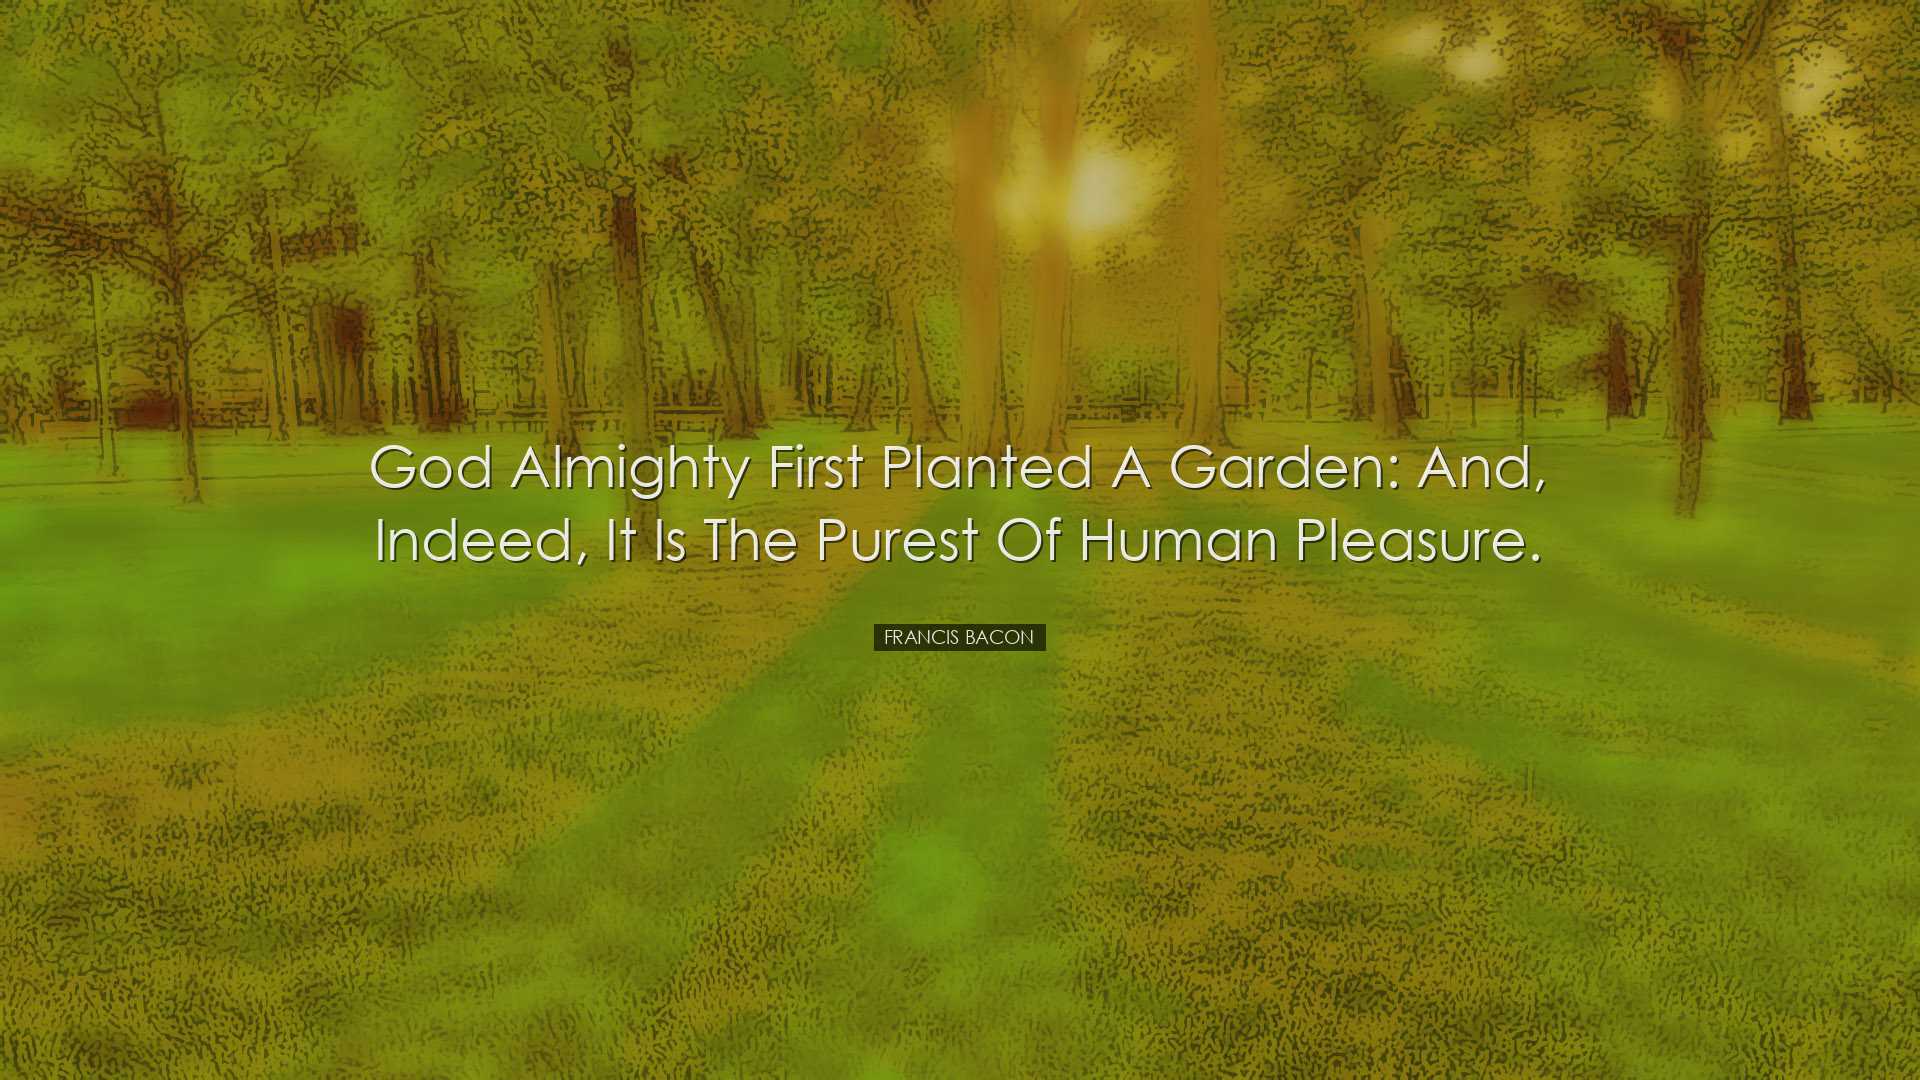 God almighty first planted a garden: and, indeed, it is the purest